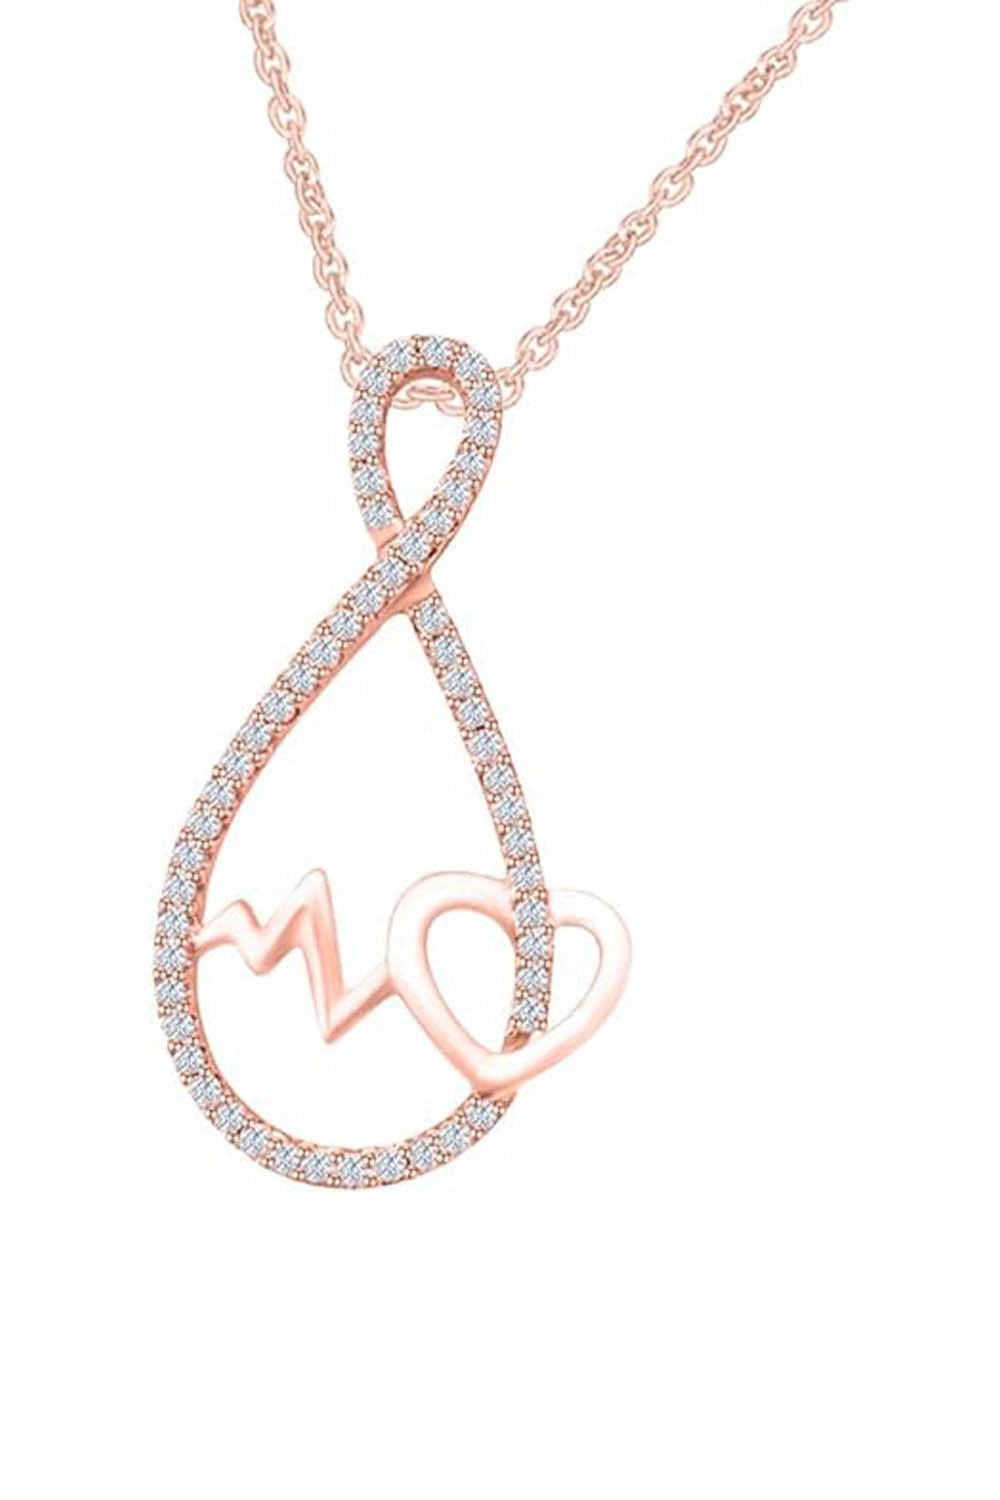 Rose Gold Color Yaathi Heartbeat Infinity Pendant Necklace